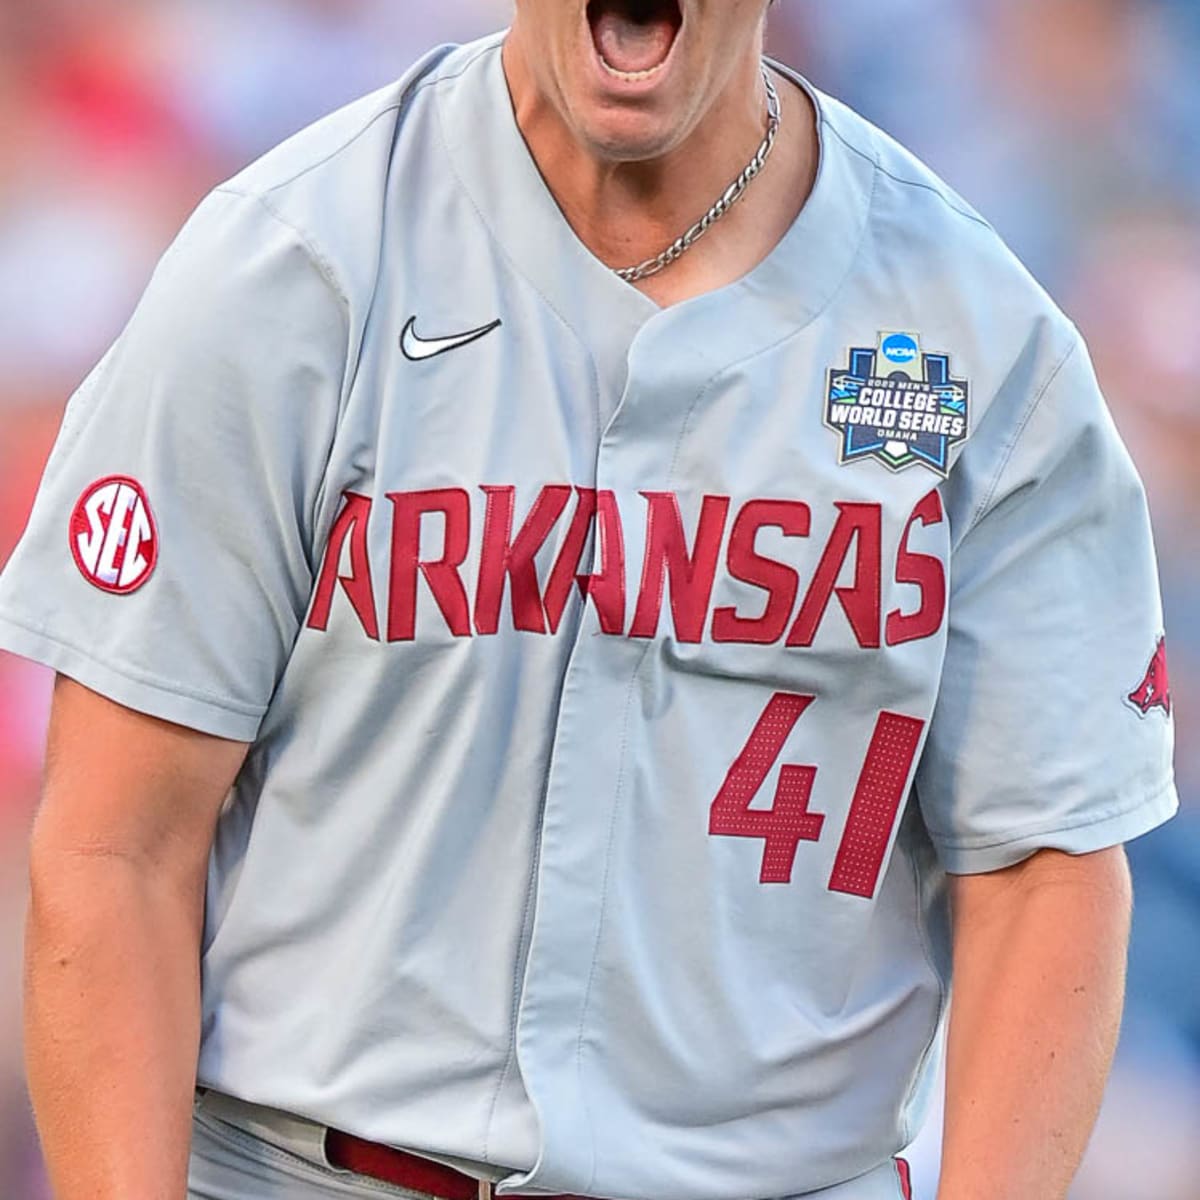 How Mississippi State baseball uniforms aided in College World Series  walk-off win over Auburn